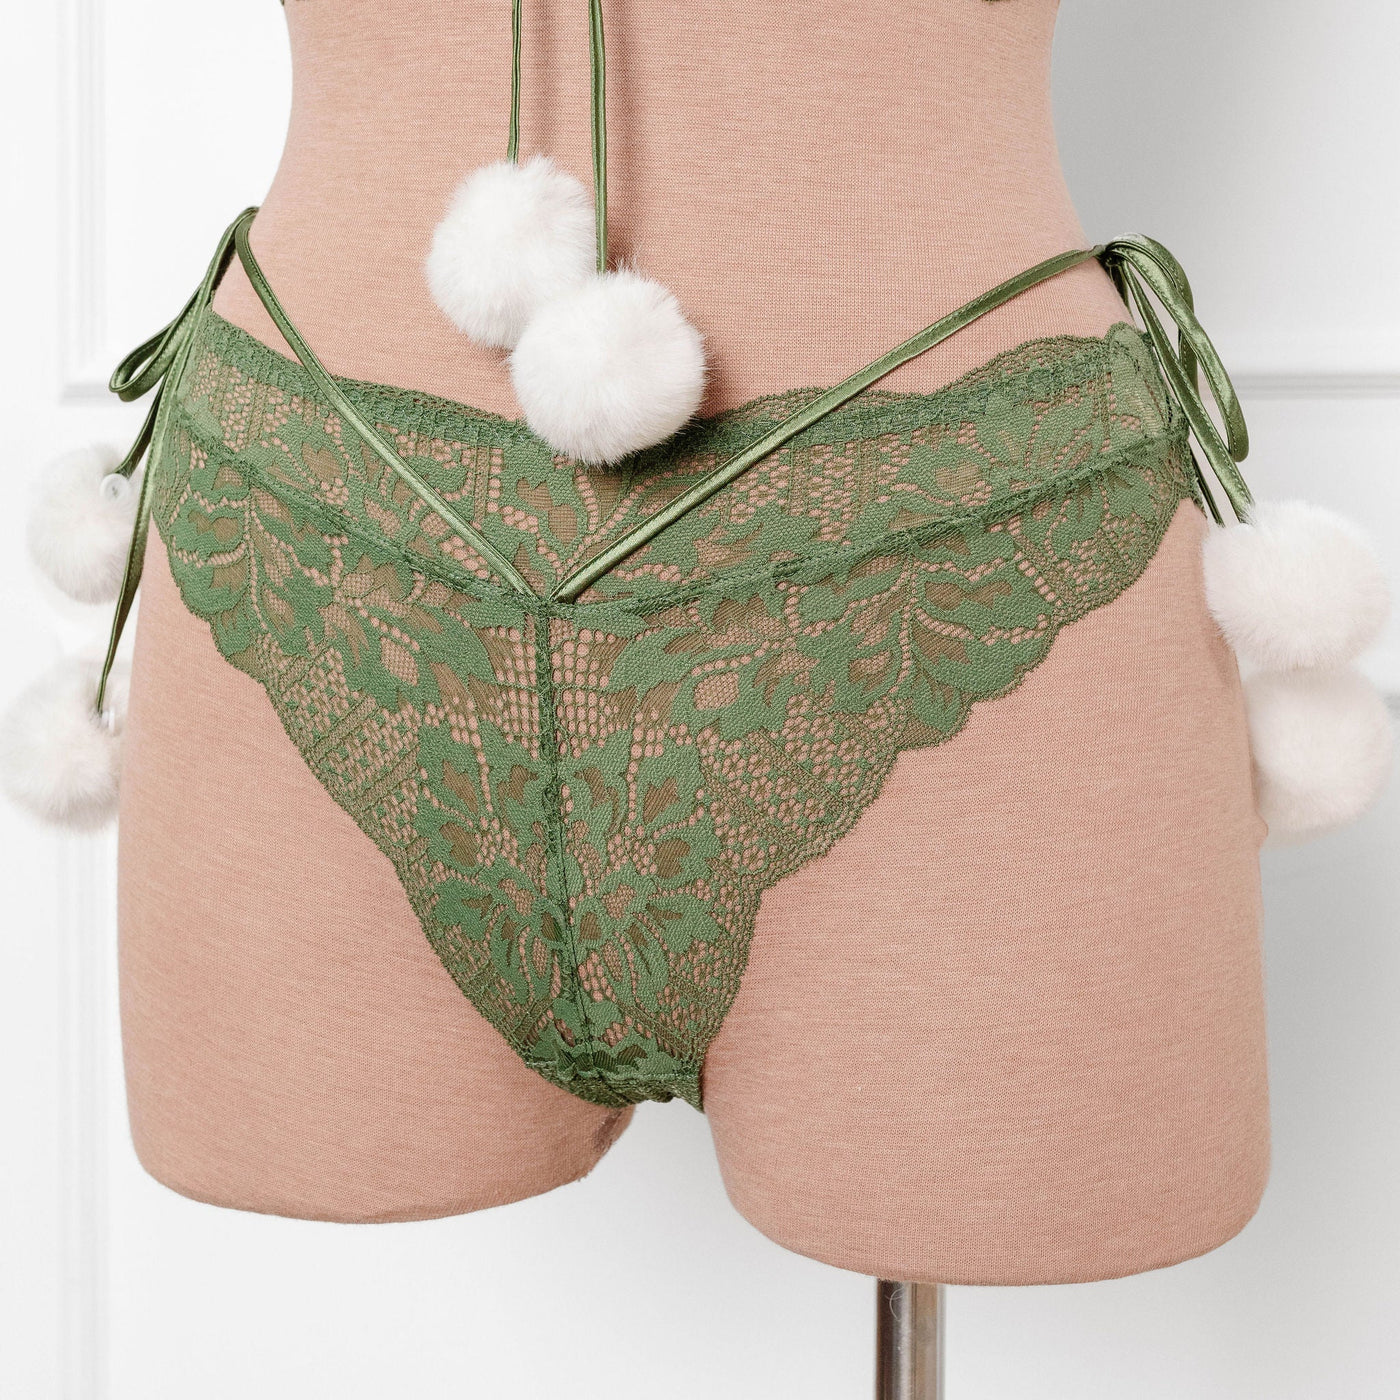 Lacy Crotchless Panty - Garden Green